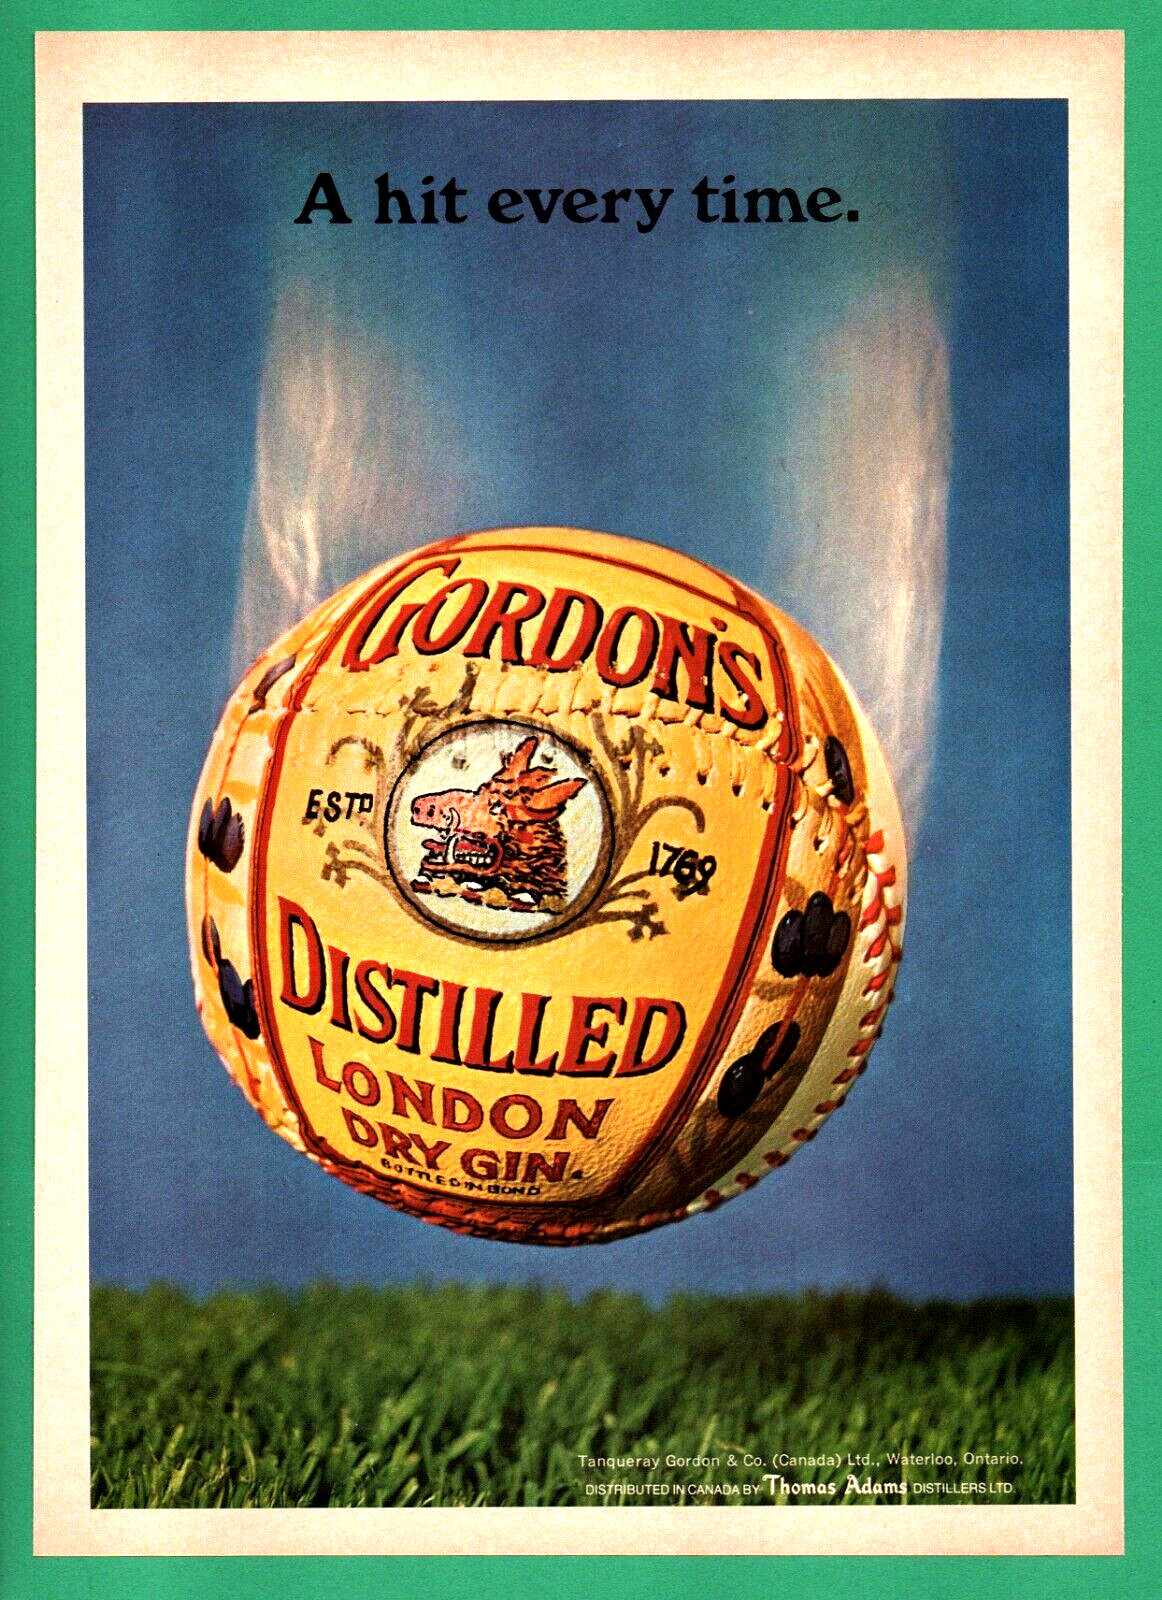 1978 Gordon's Distilled London Dry Gin Vintage Print Ad Approx.  8 by 11 inches